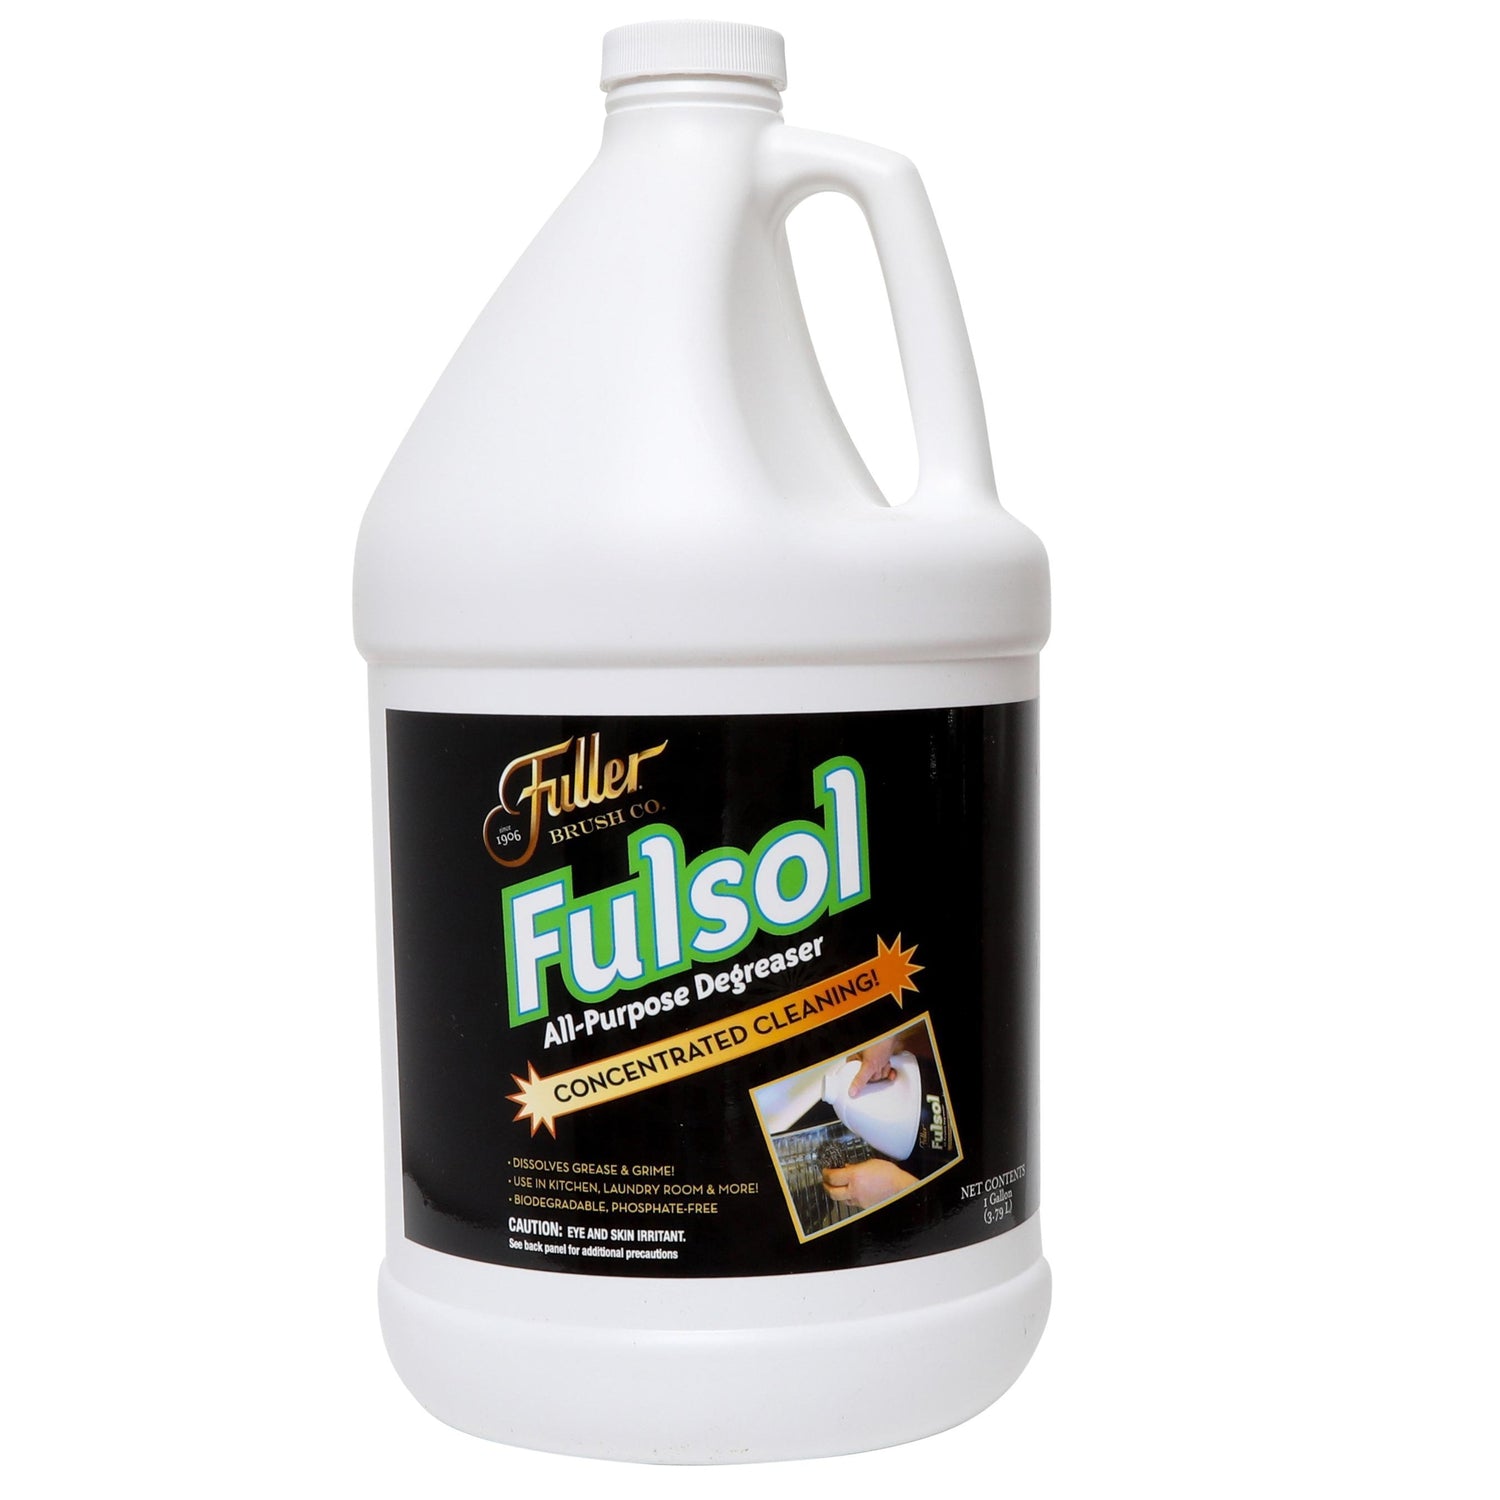 Fulsol Degreaser - All Purpose Cleaner for Oil, Grease & Grime Cleaner  Kitchen Degreaser and Stove Top Degreaser - Degreasers — Fuller Brush  Company